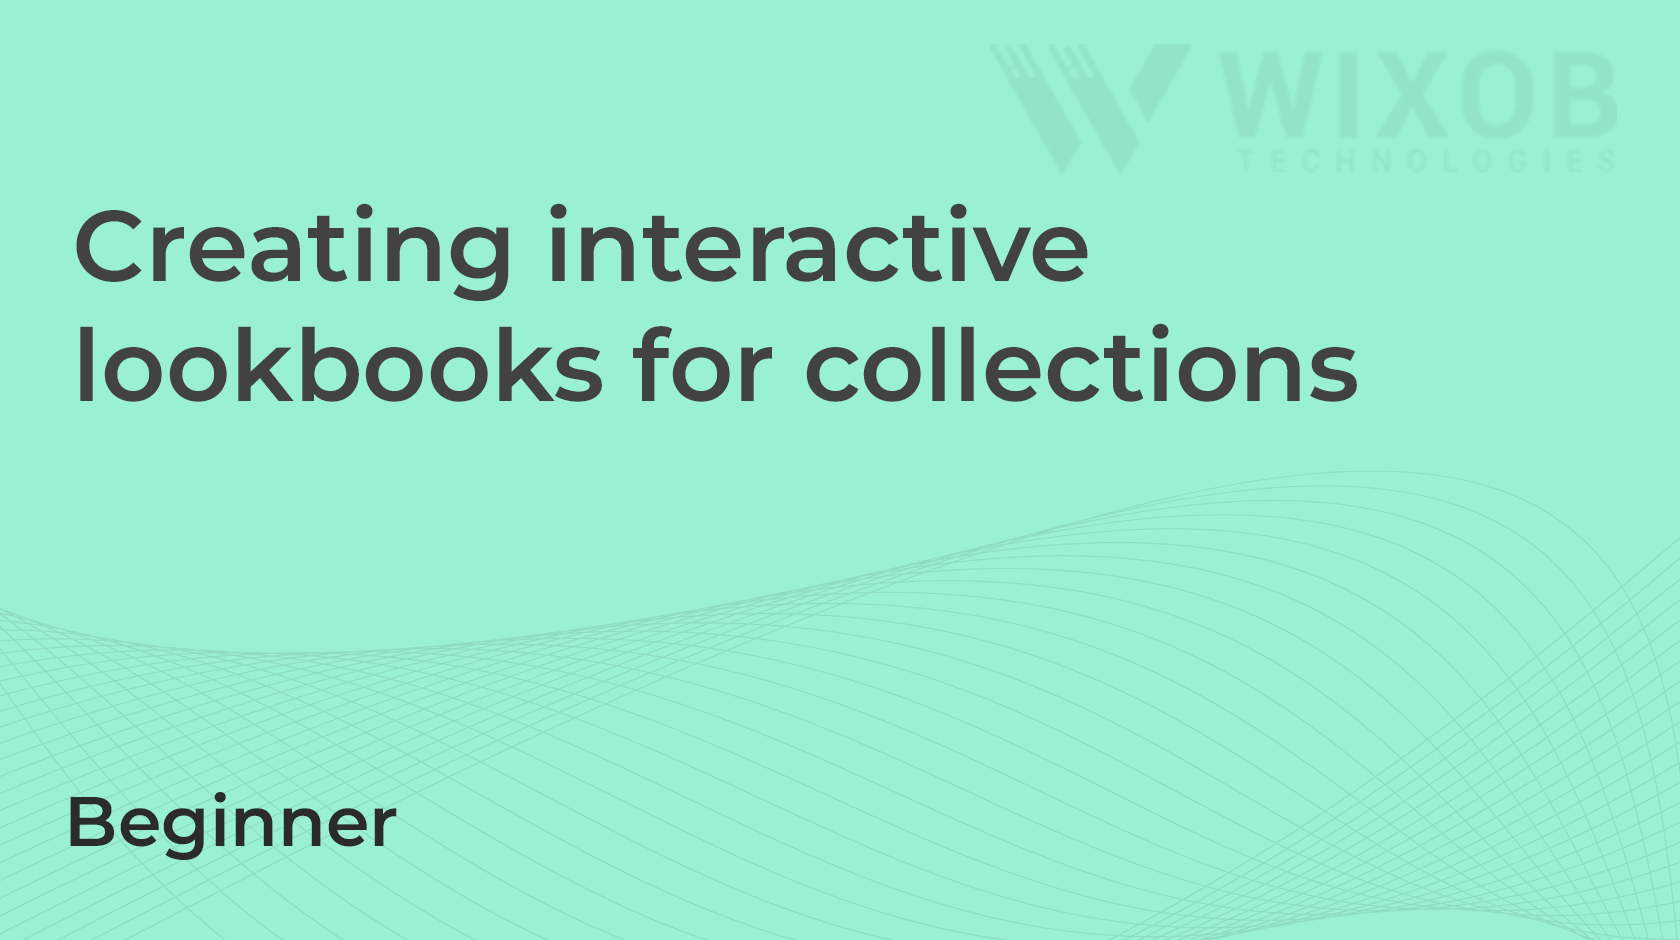 Creating interactive lookbooks for collections